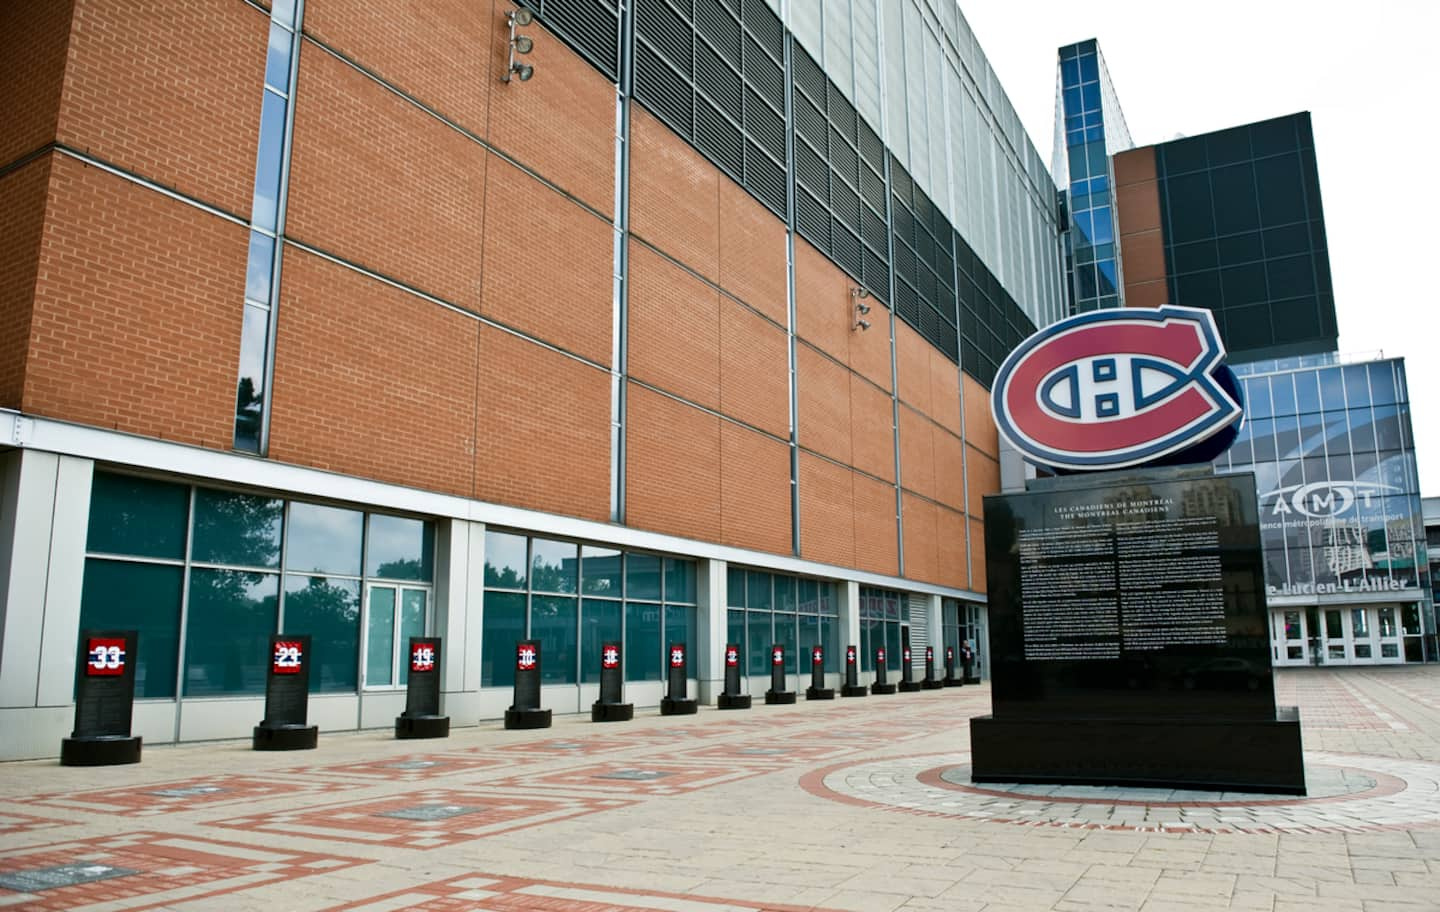 The manipulation of the Bell Center